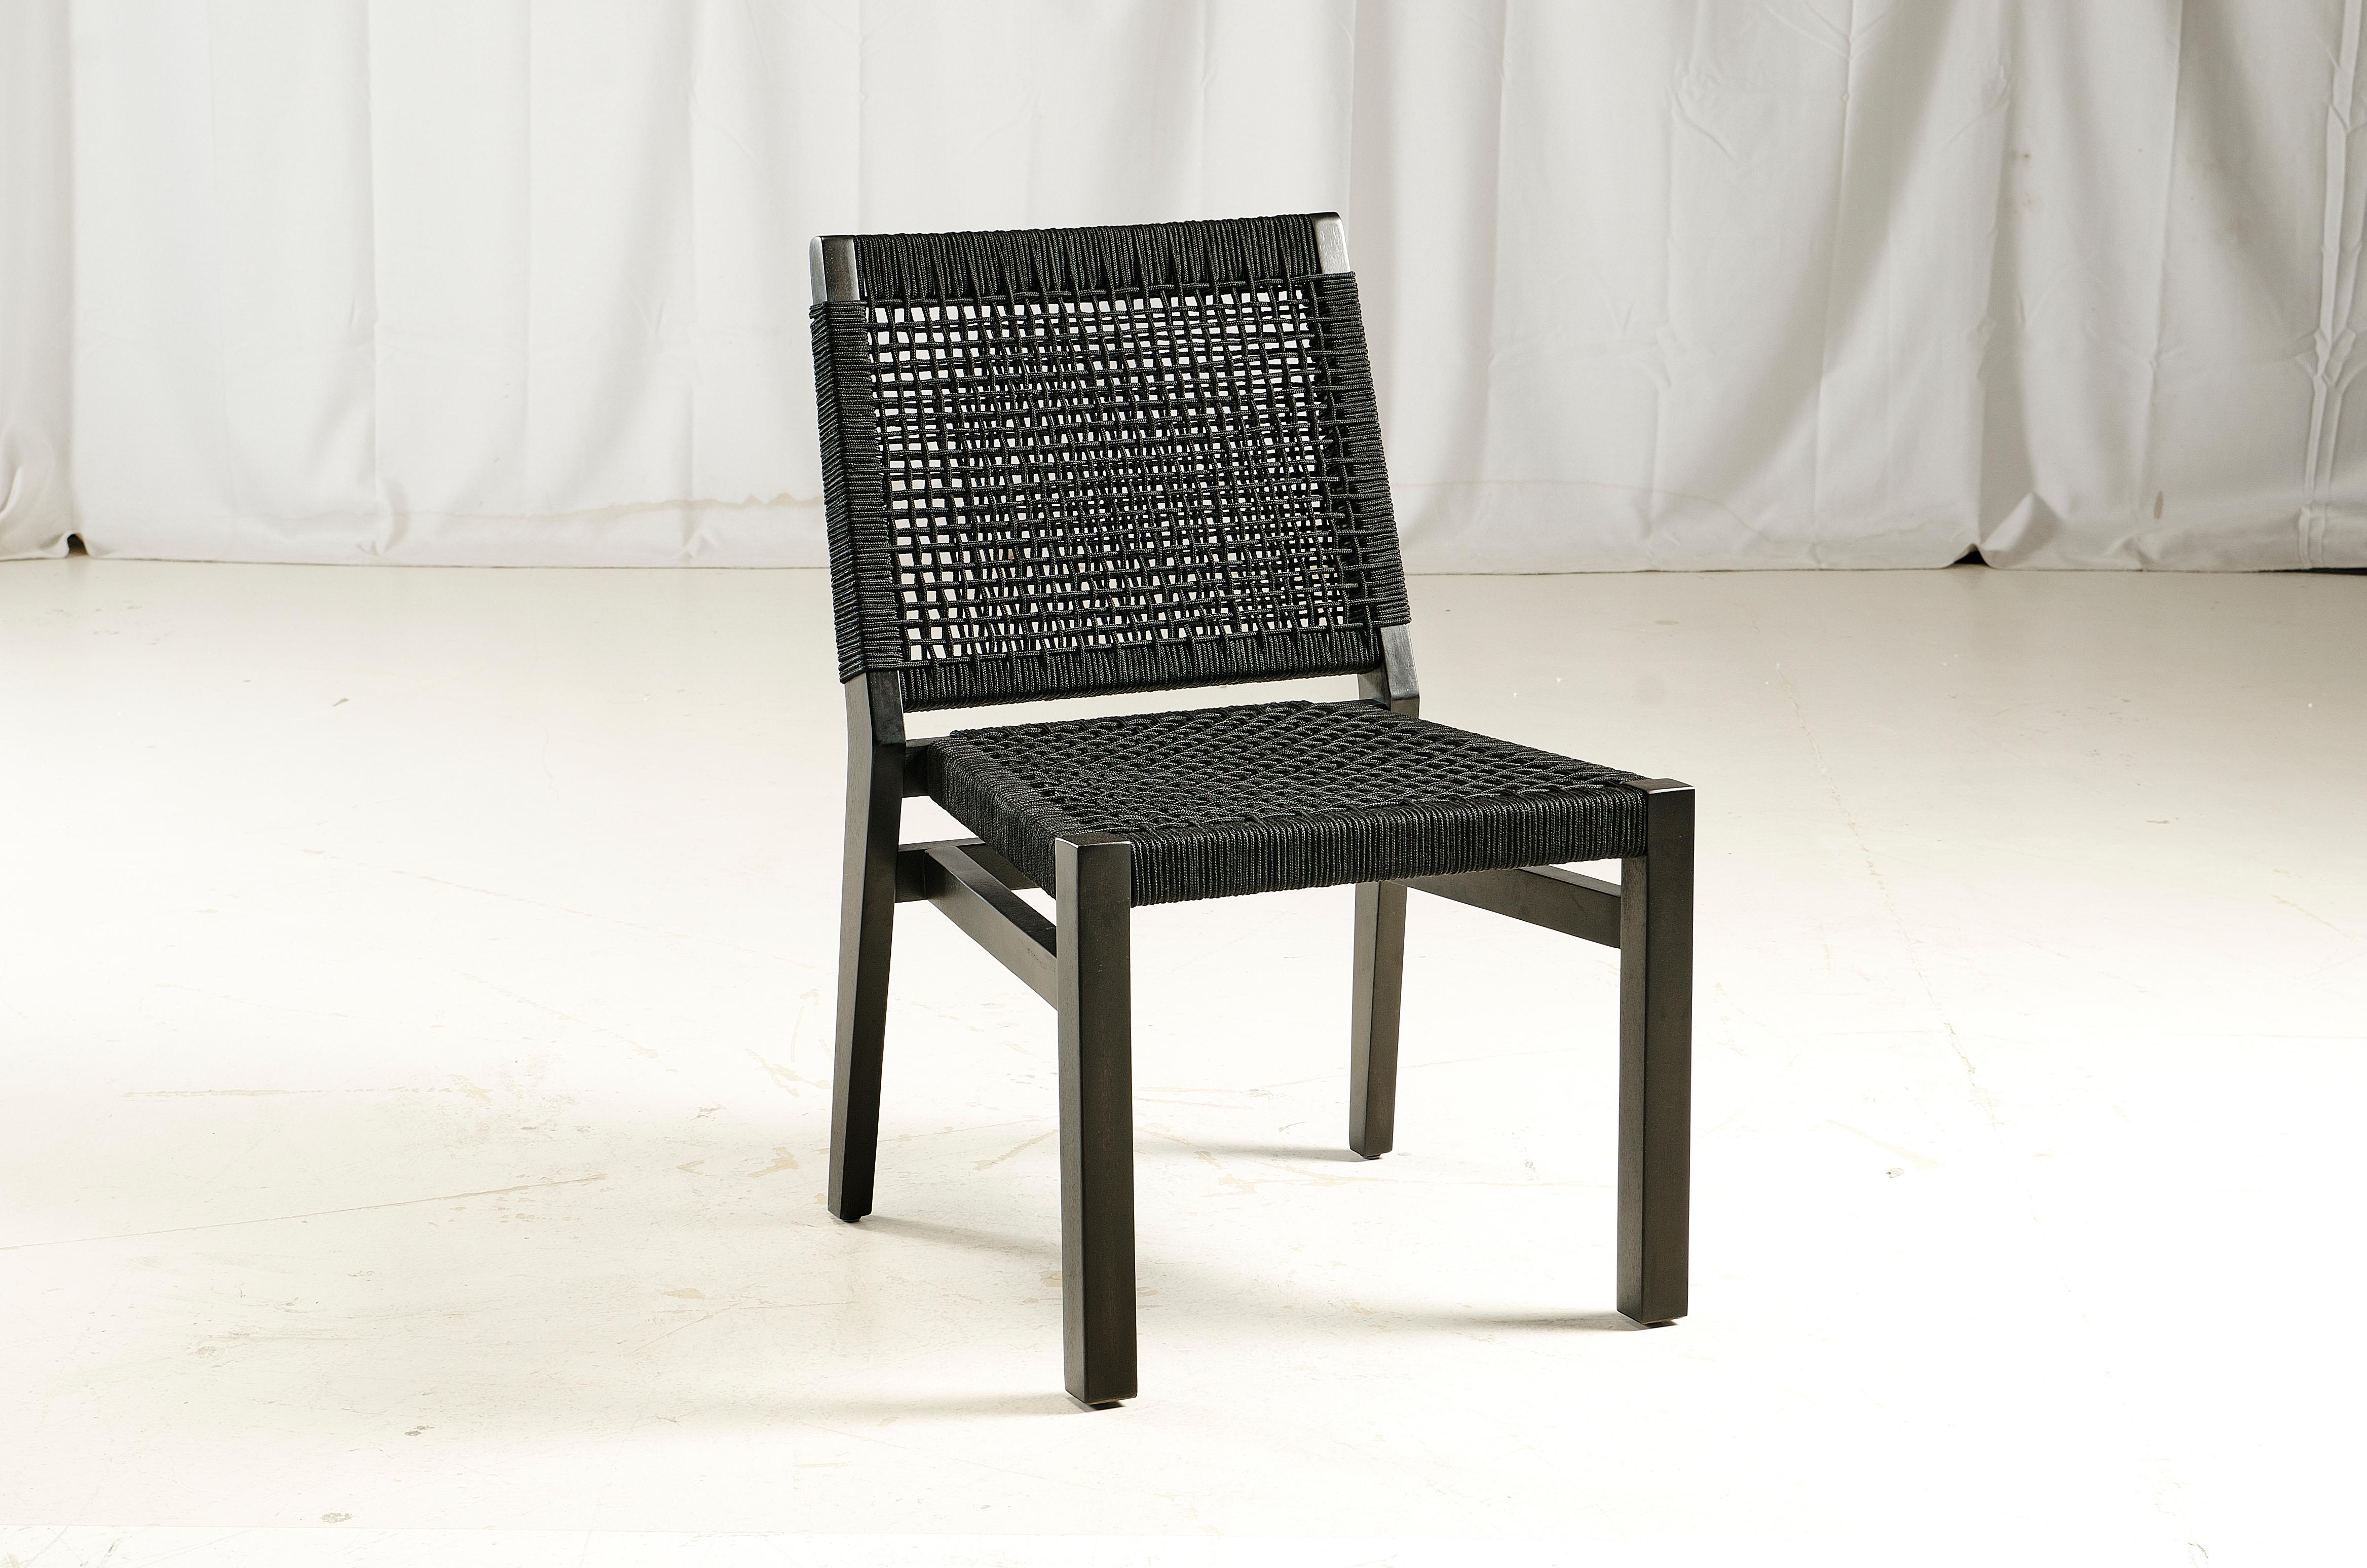 Acacia wood frame, charcoal wash. 
Synthetic rope off white color.
Rope thickness: 4.5 mm
Contract grade chair.
Avoid chemicals when cleaning stained wood.
Contact us to enquire about COM/COL production, requirements and material shipping